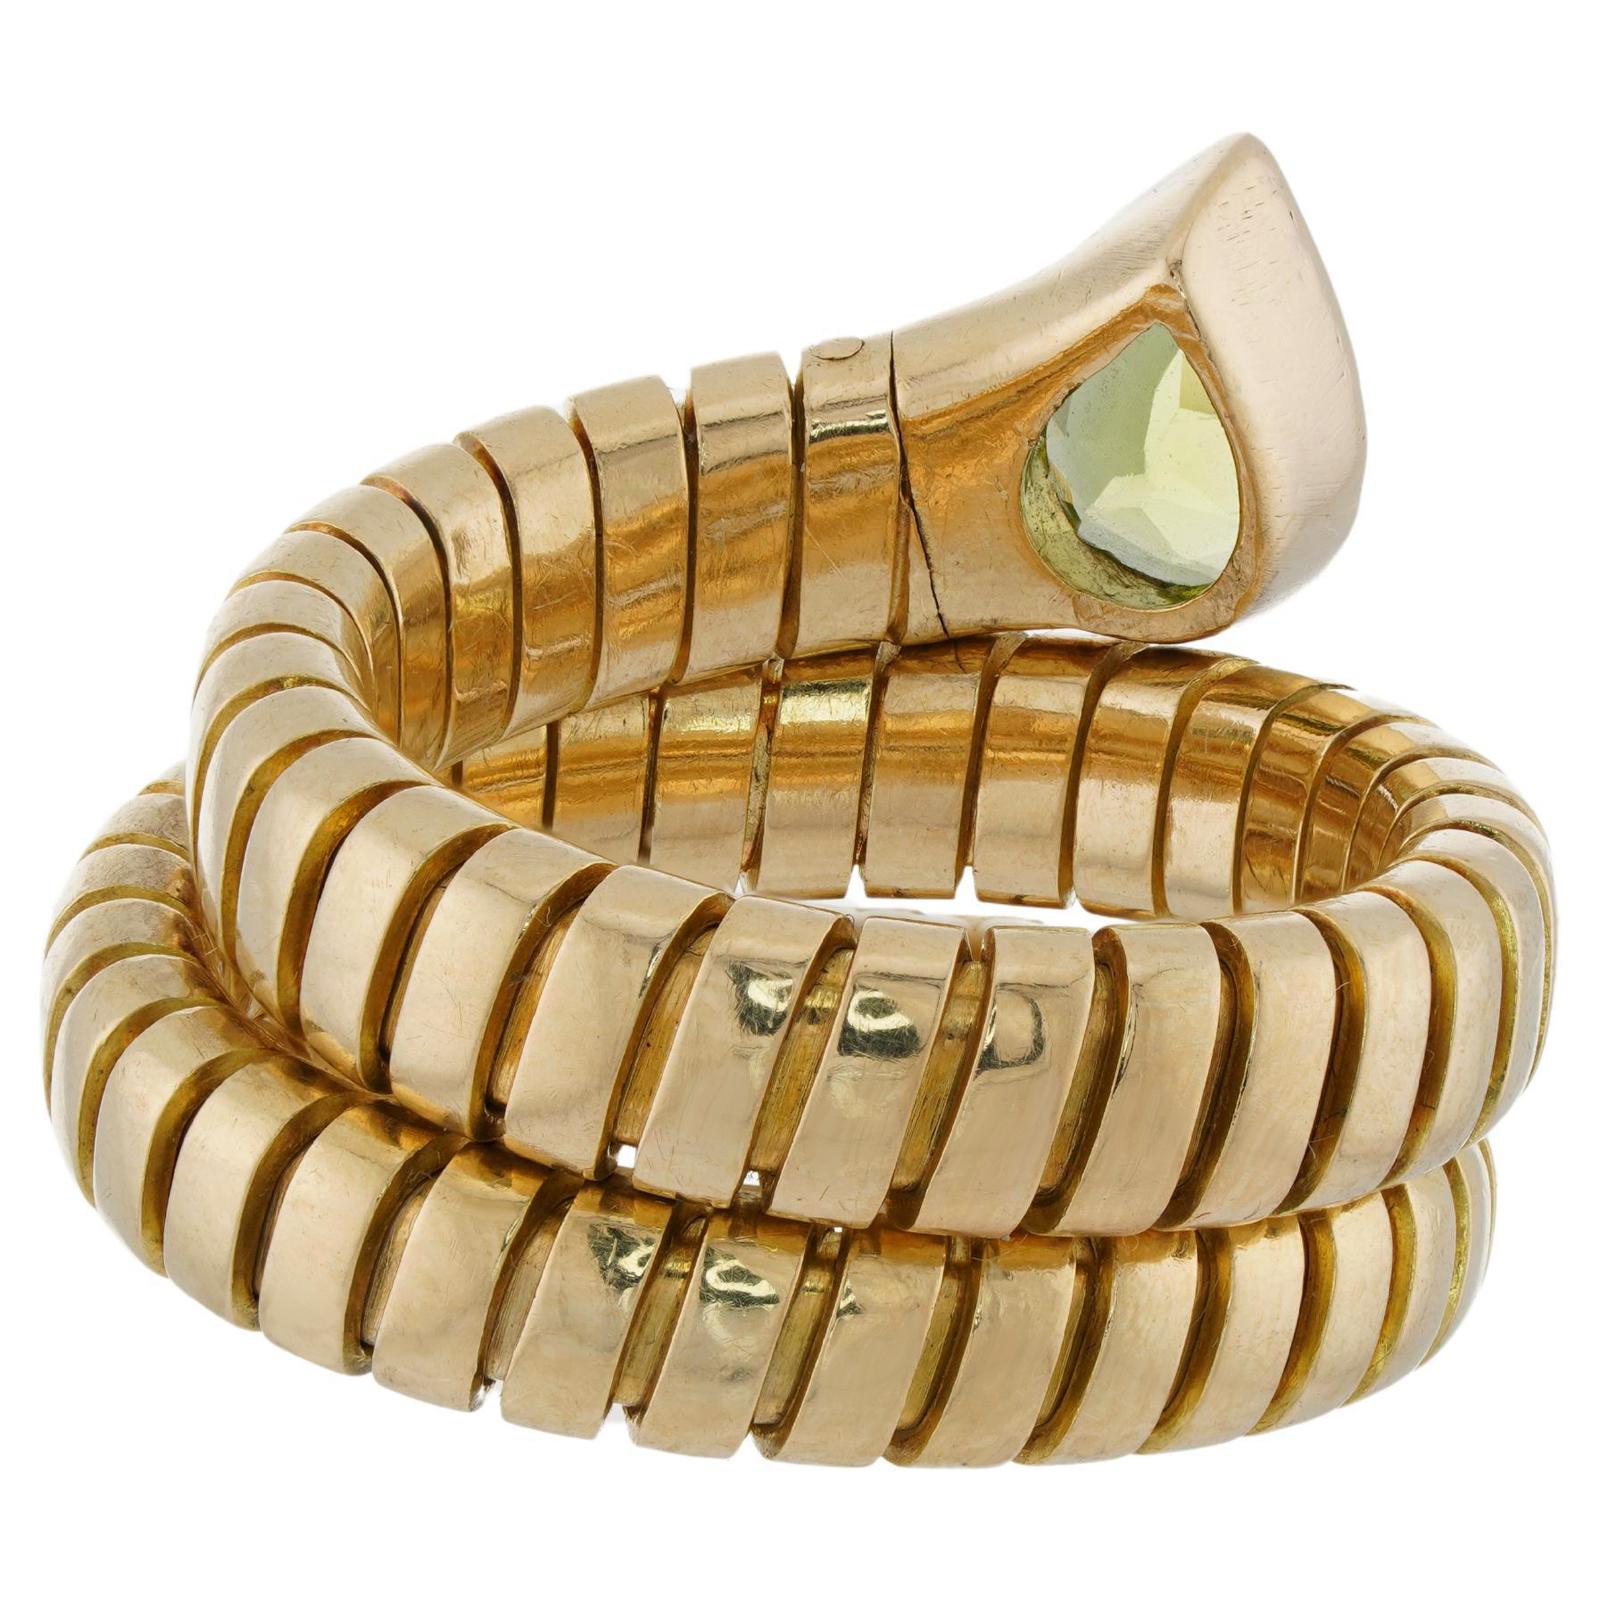 This fabulous authentic Bvlgari ring from the classic Tubogas collection is crafted in 18k yellow gold and set with a pear-cut peridot. The flex wrap allows the ring size to be slightly adjustable . Made in Italy circa 1980s. Measurements: 0.70